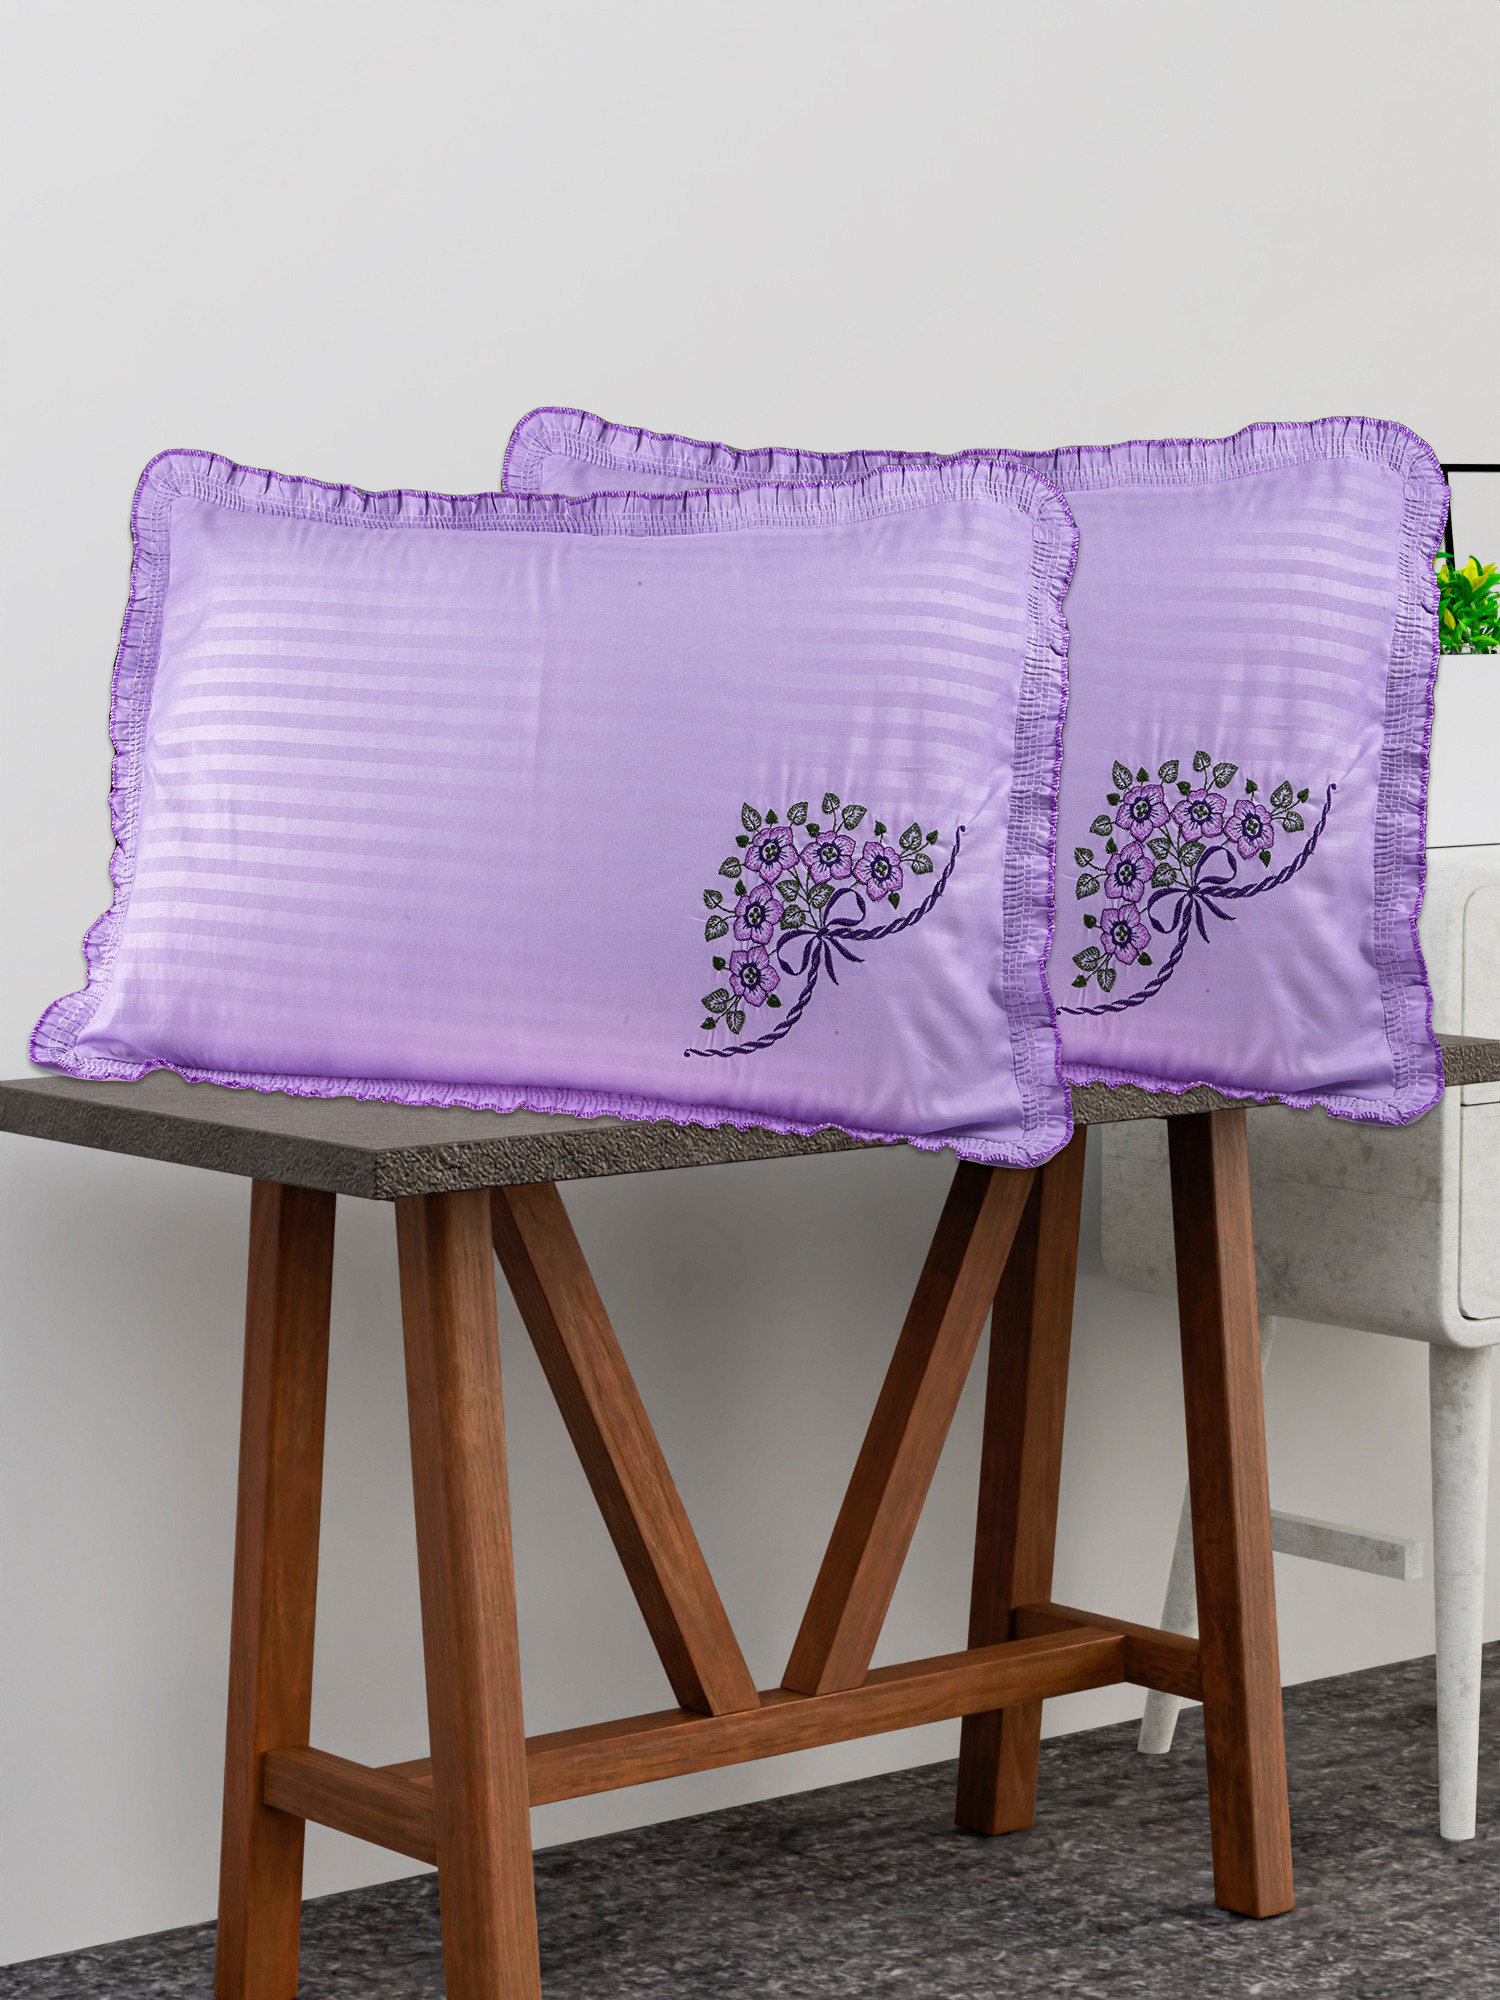 Kuber Industries Pillow Cover | Cotton Pillow Cover Set | Cushion Pillow Cover Set | Pillow Cover Set for Bedroom | Lining Embroidery Pillow Cover Set |Purple